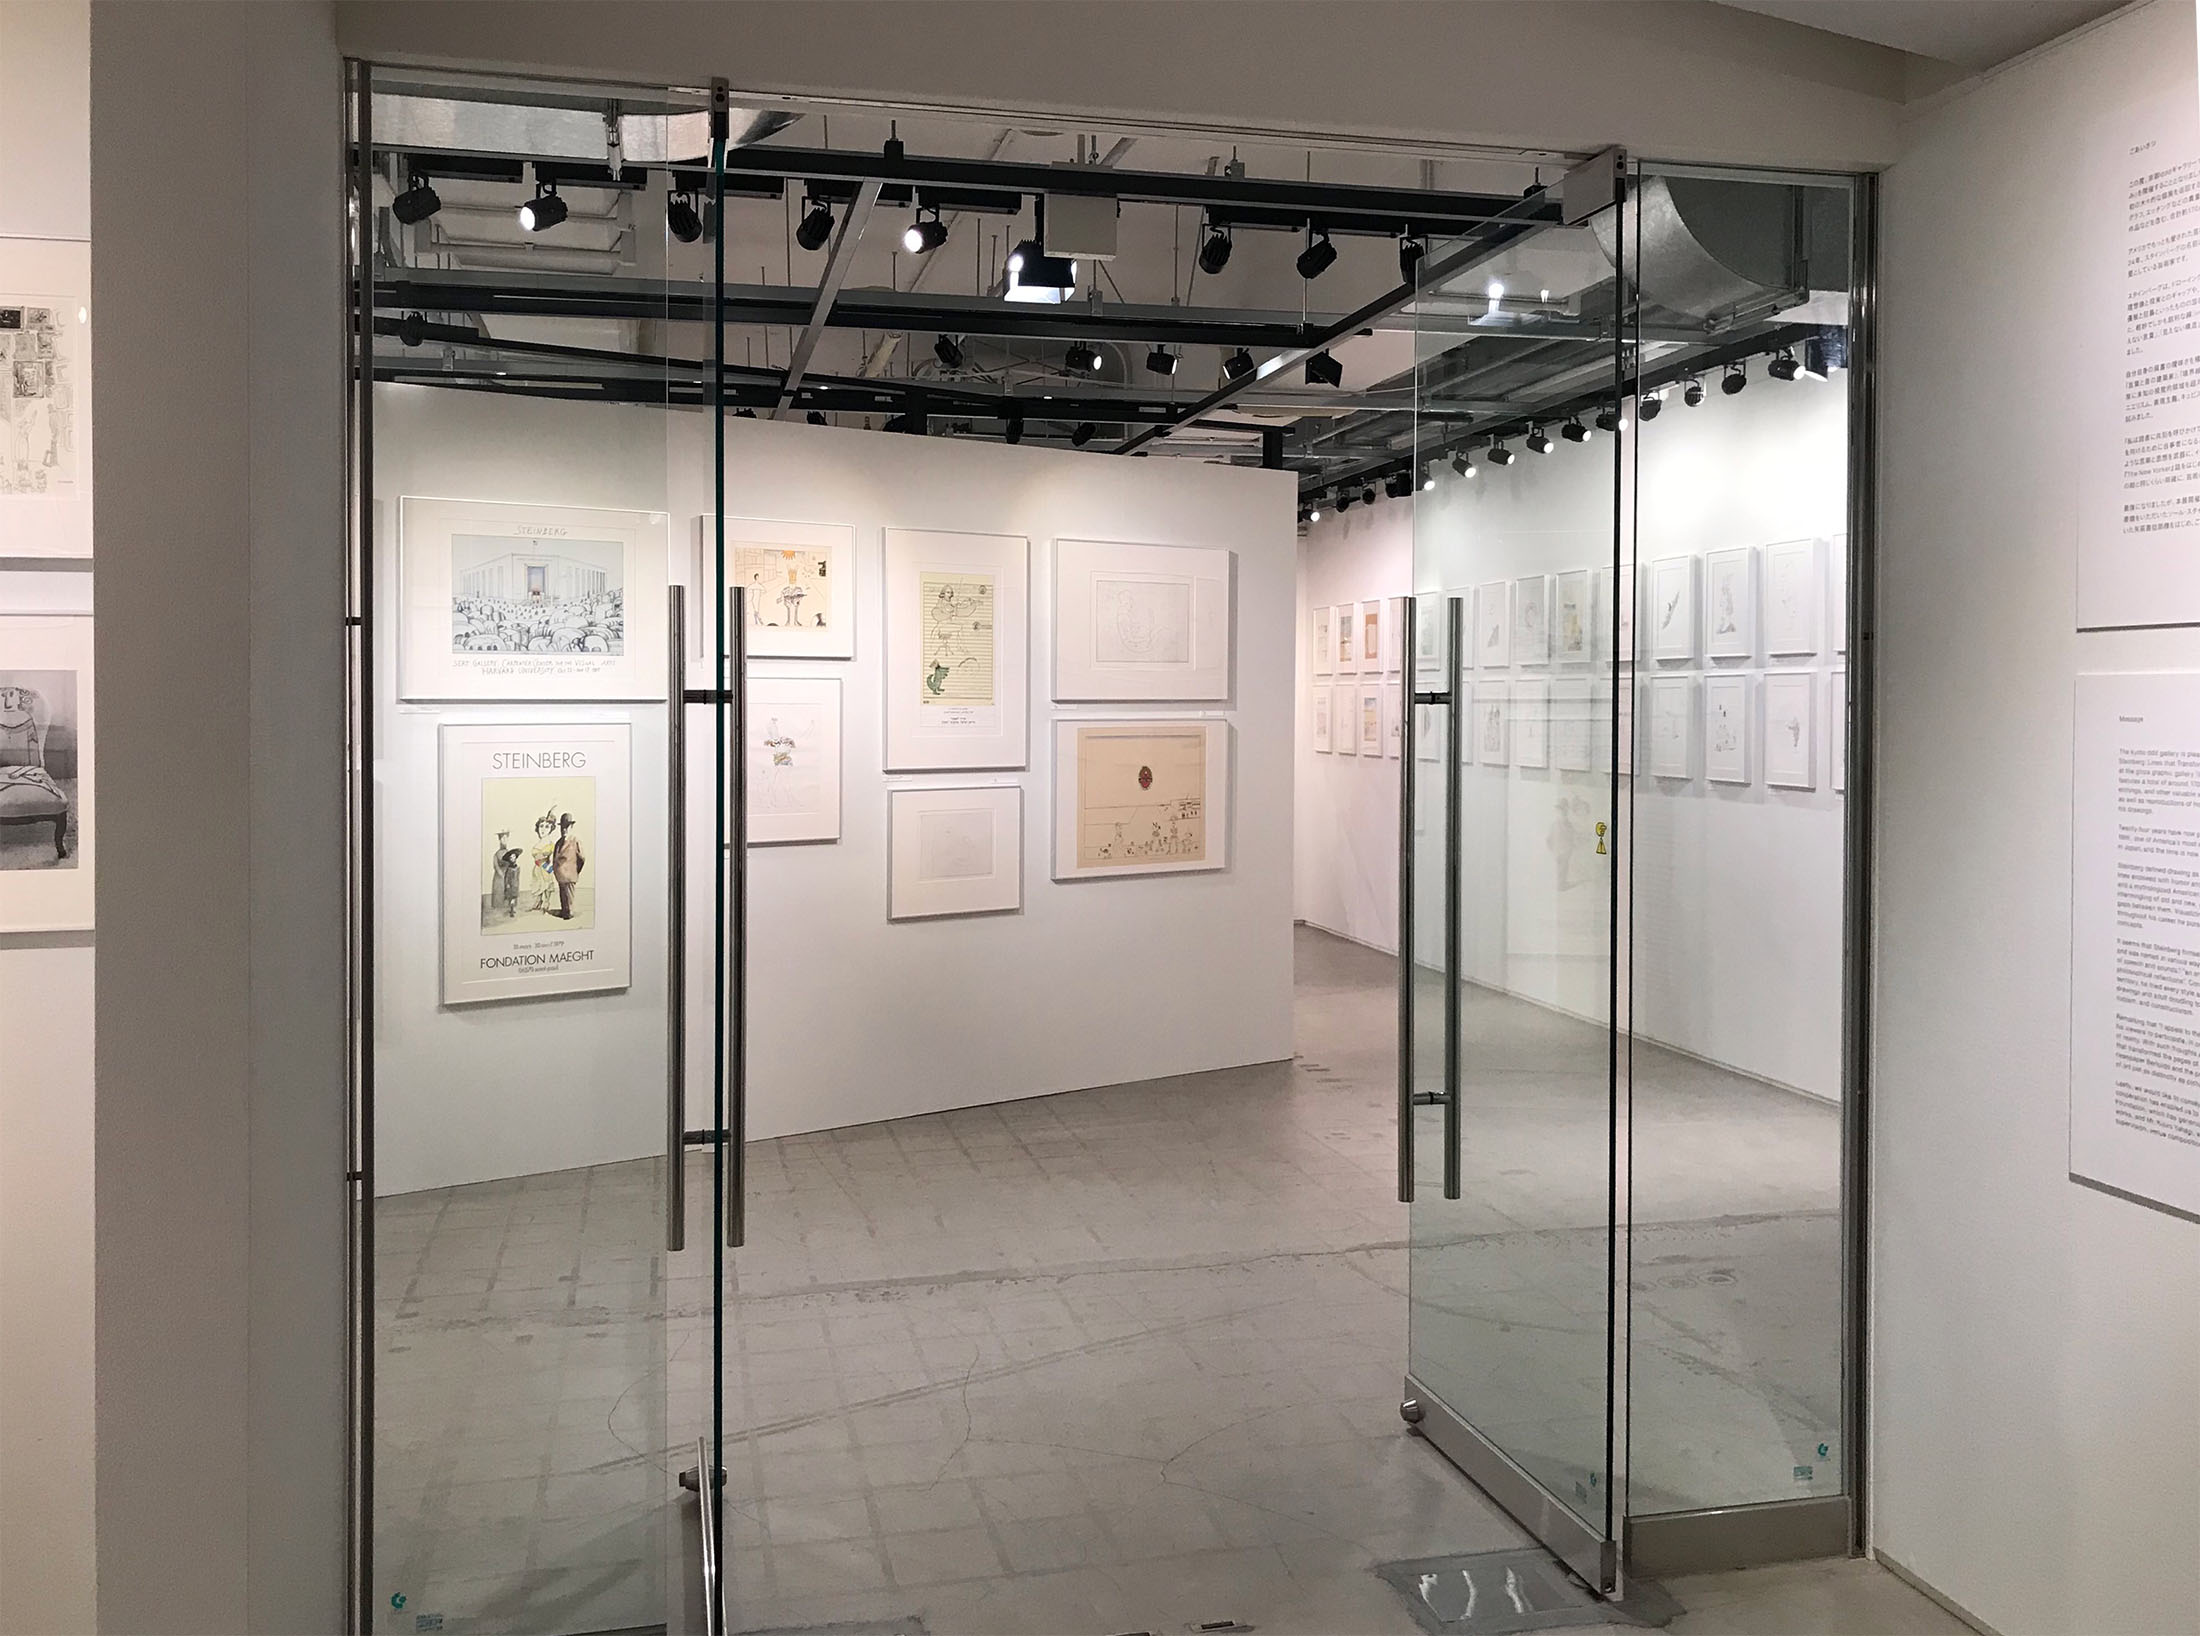 Saul Steinberg: Lines That Transform the Real World, exhibition at the ddd gallery in Kyoto, Japan. Entrance